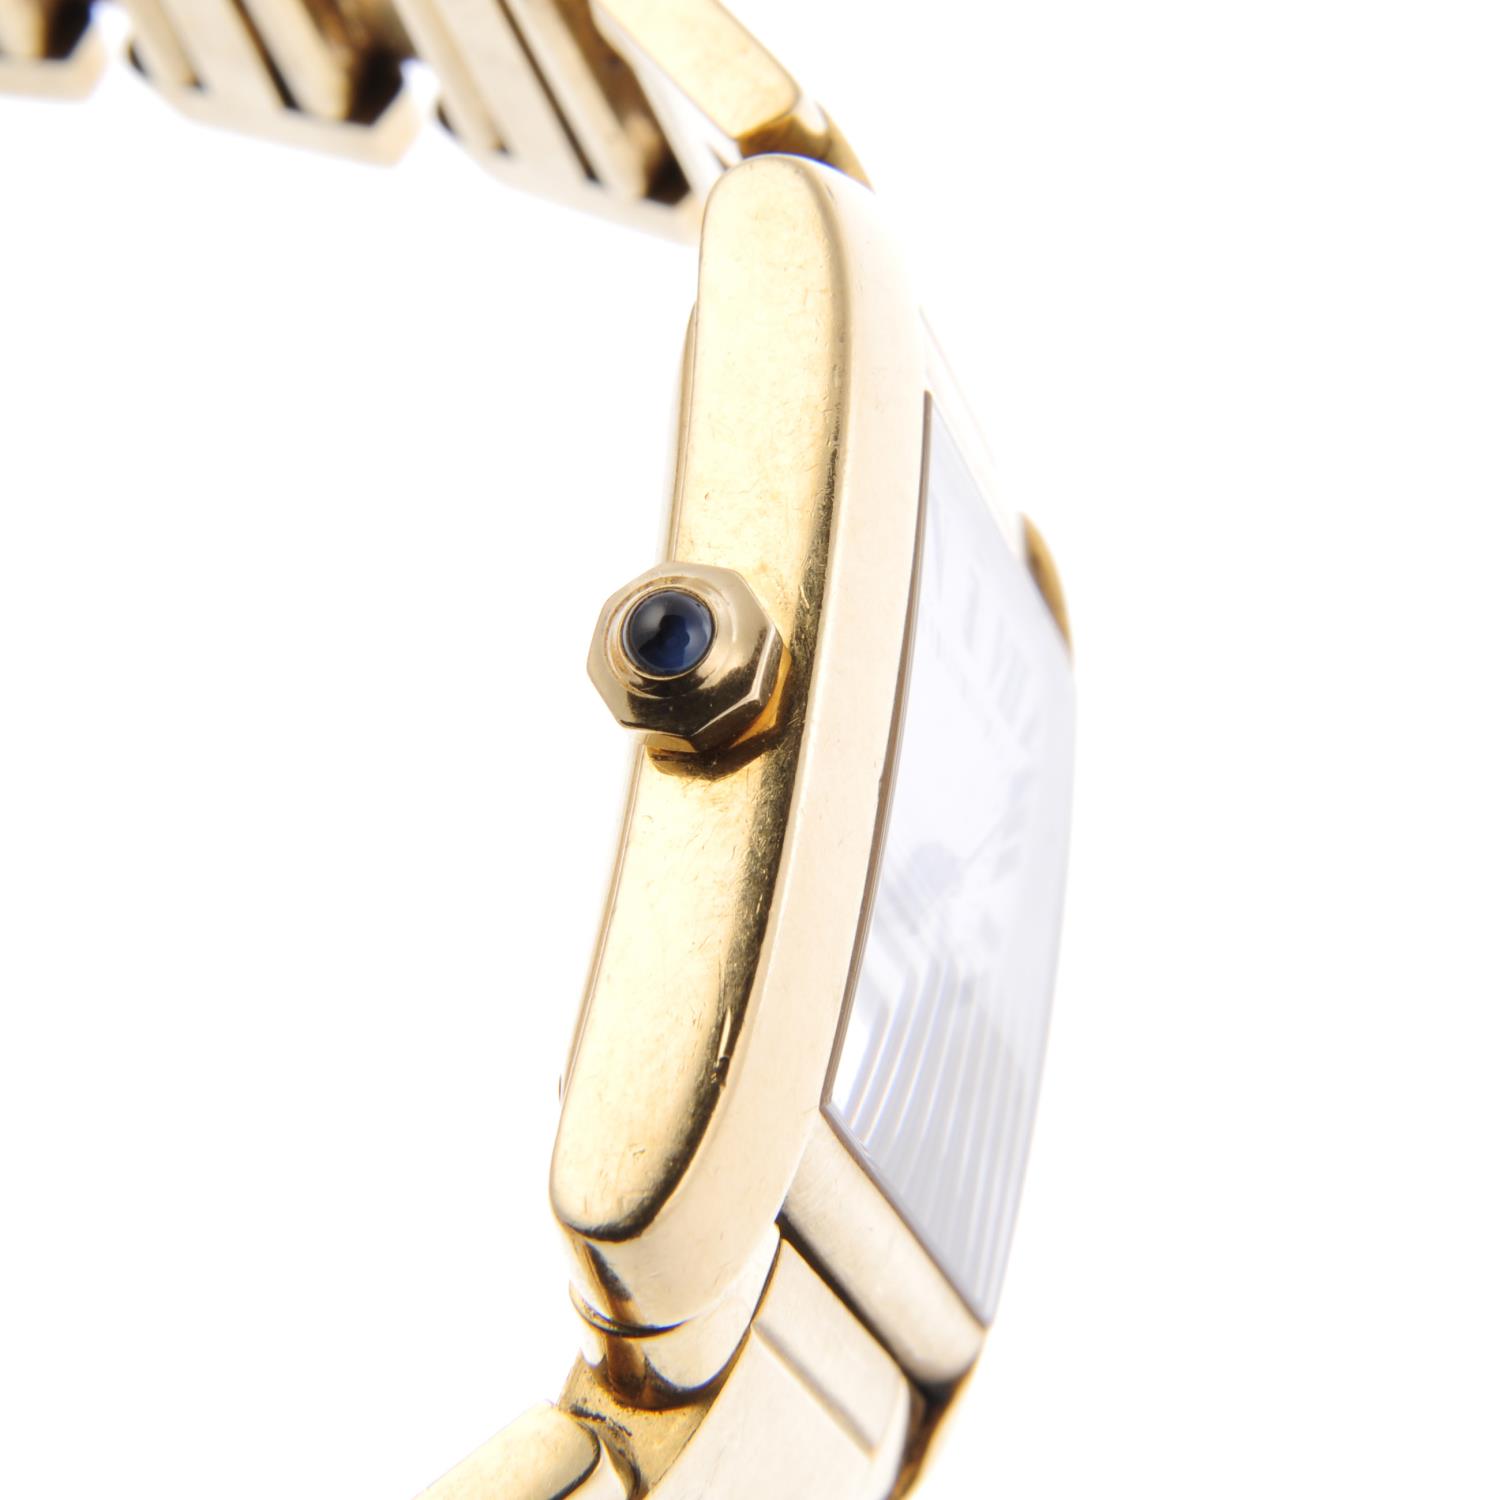 CARTIER - a Tank Francaise bracelet watch. 18ct yellow gold case. Reference 1840, serial MG260407. - Image 3 of 4